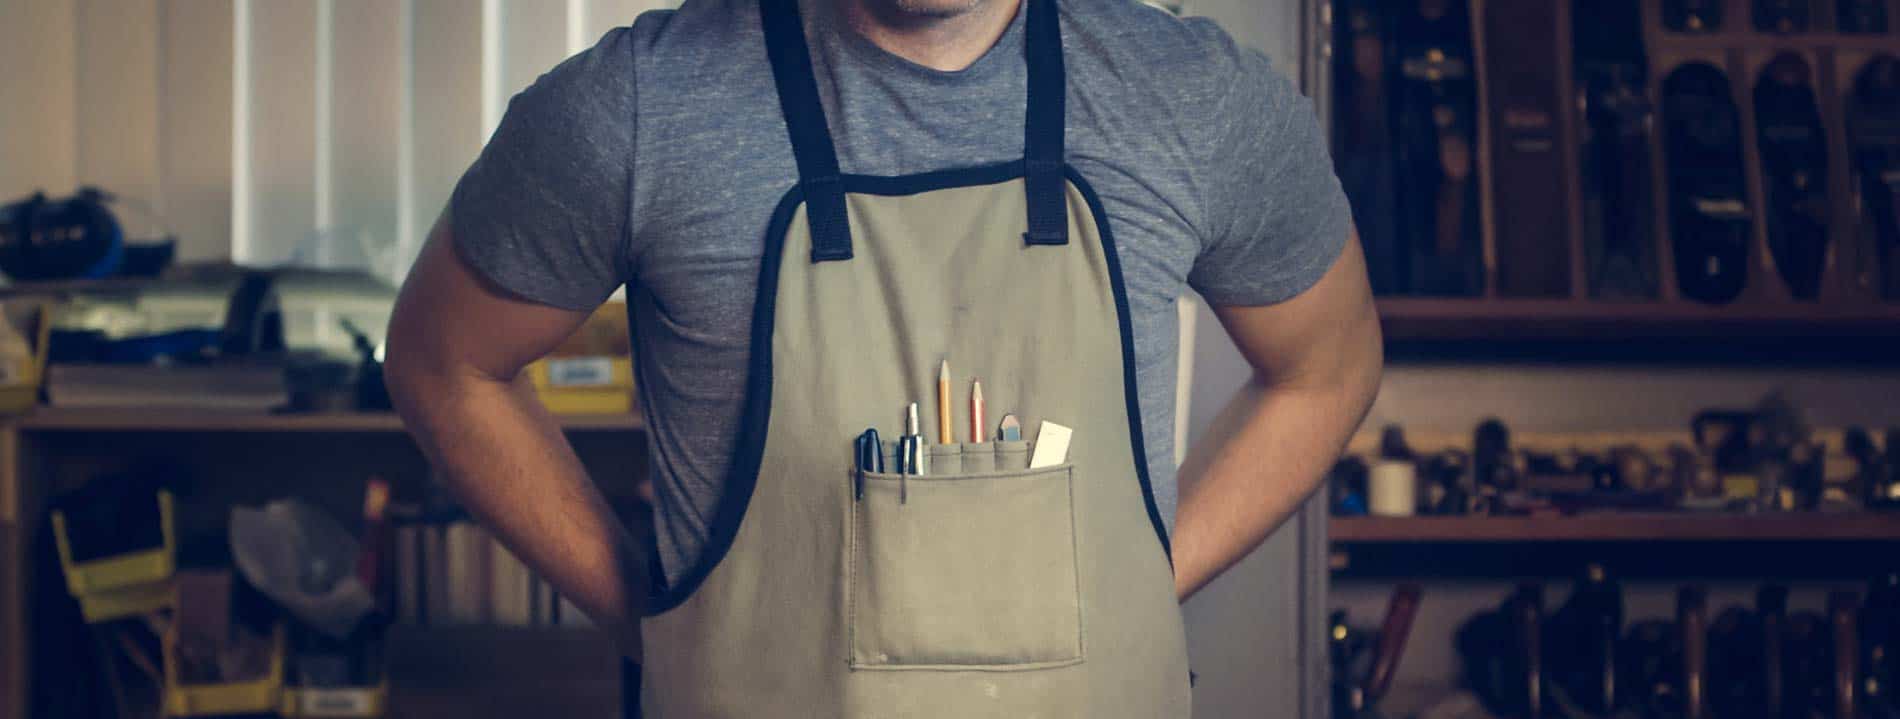 clio-websites-covid19-small-business-support-man-wearing-gray-shirt-and-apron